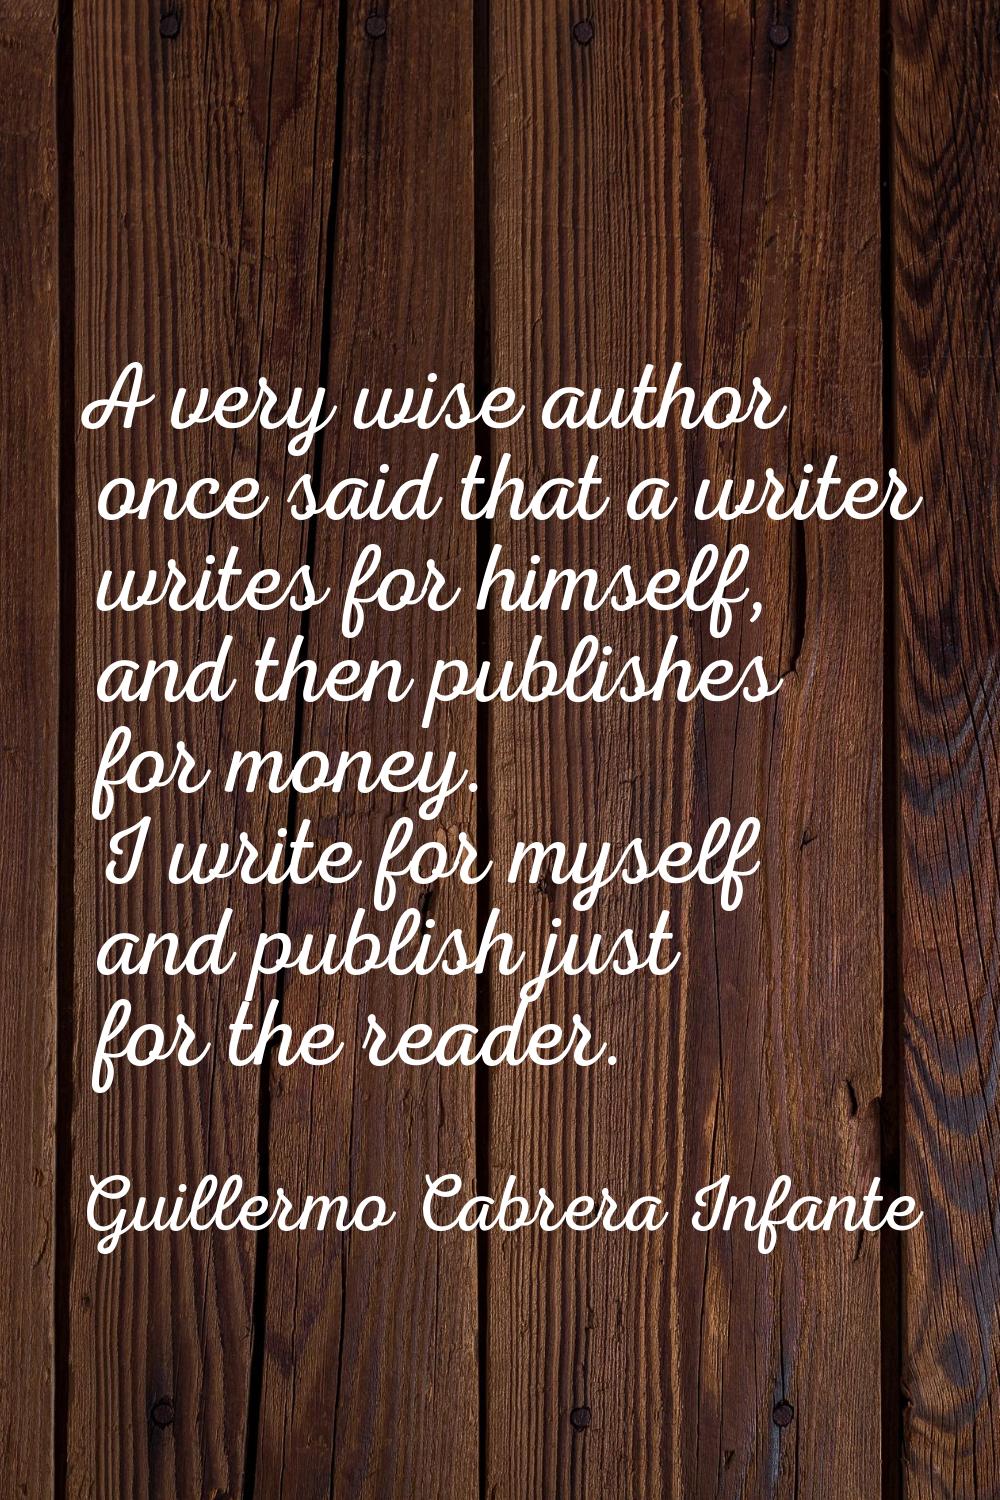 A very wise author once said that a writer writes for himself, and then publishes for money. I writ